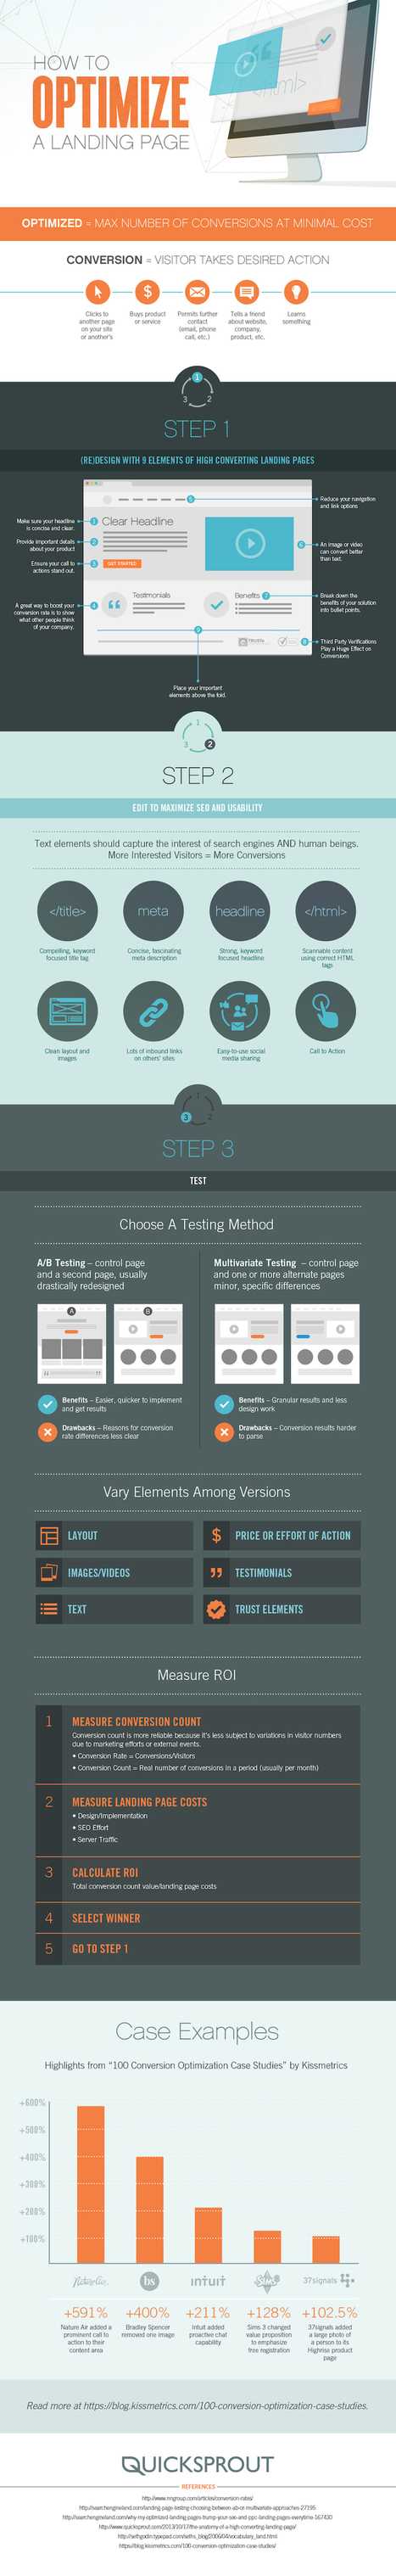 How to Optimize a Landing Page for SEO and Conversion #infographic | MarketingHits | Scoop.it